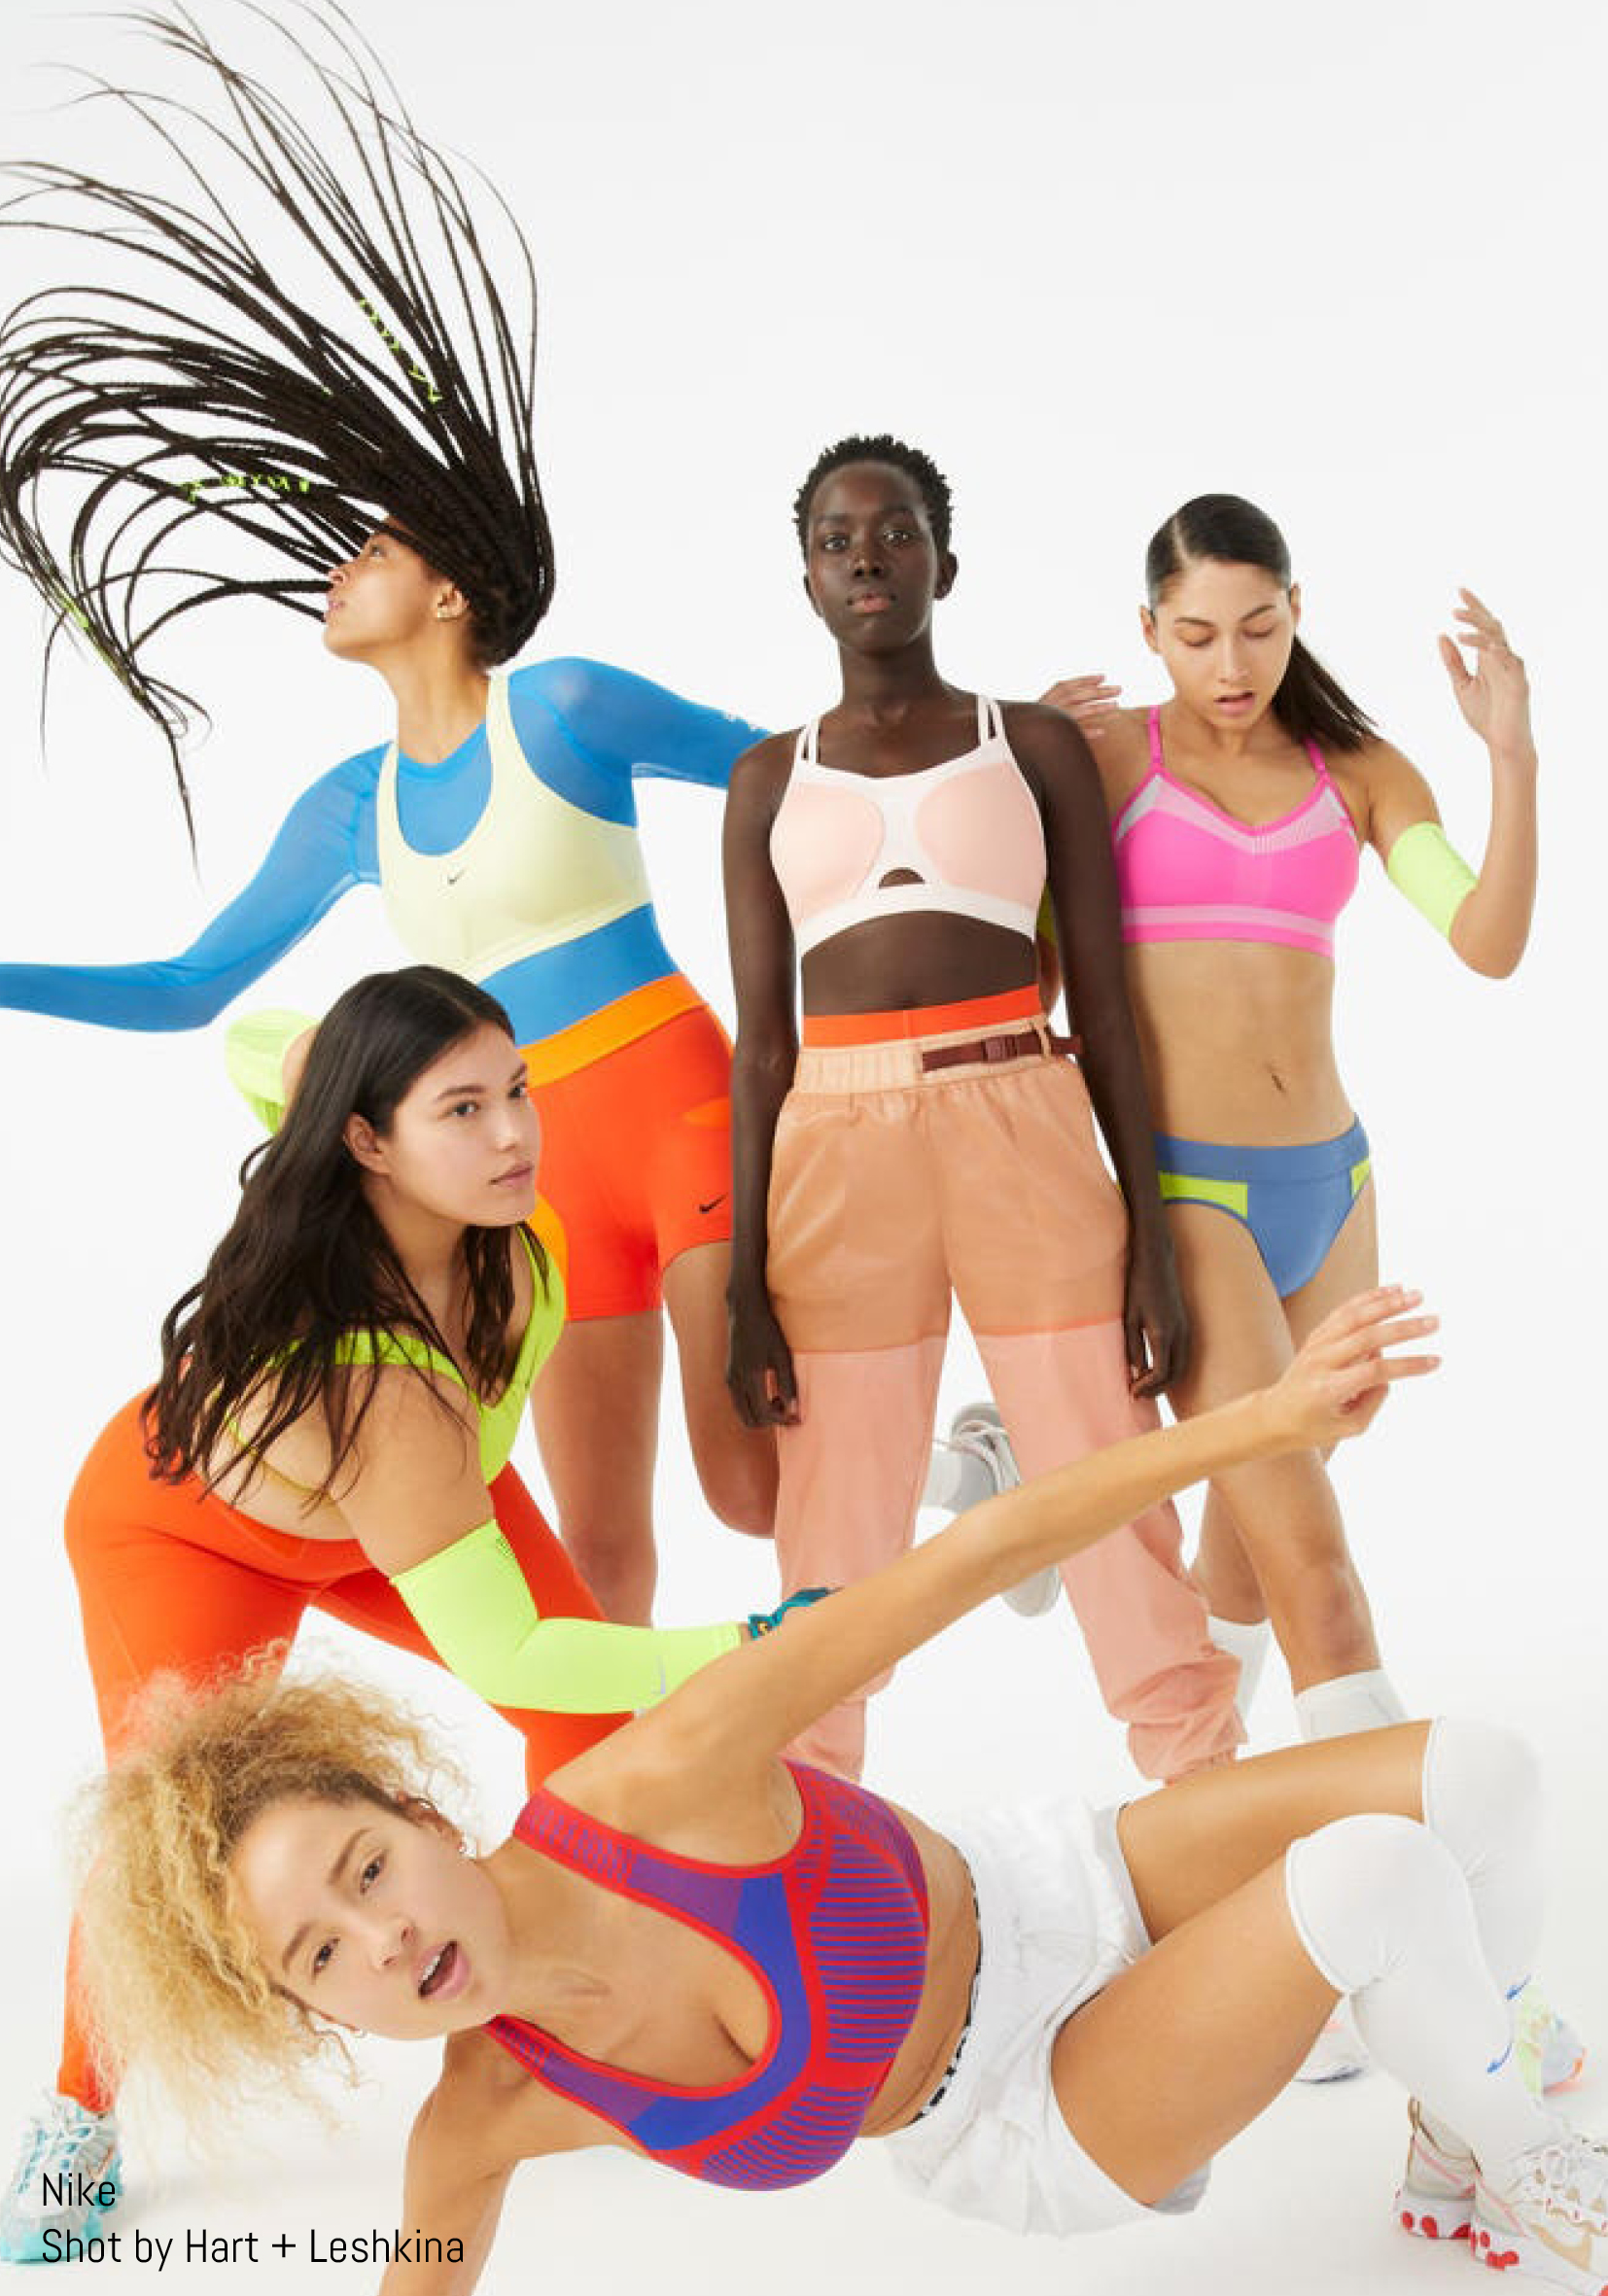 On the Runway, Sportswear Finally Edges Out Sports Ware